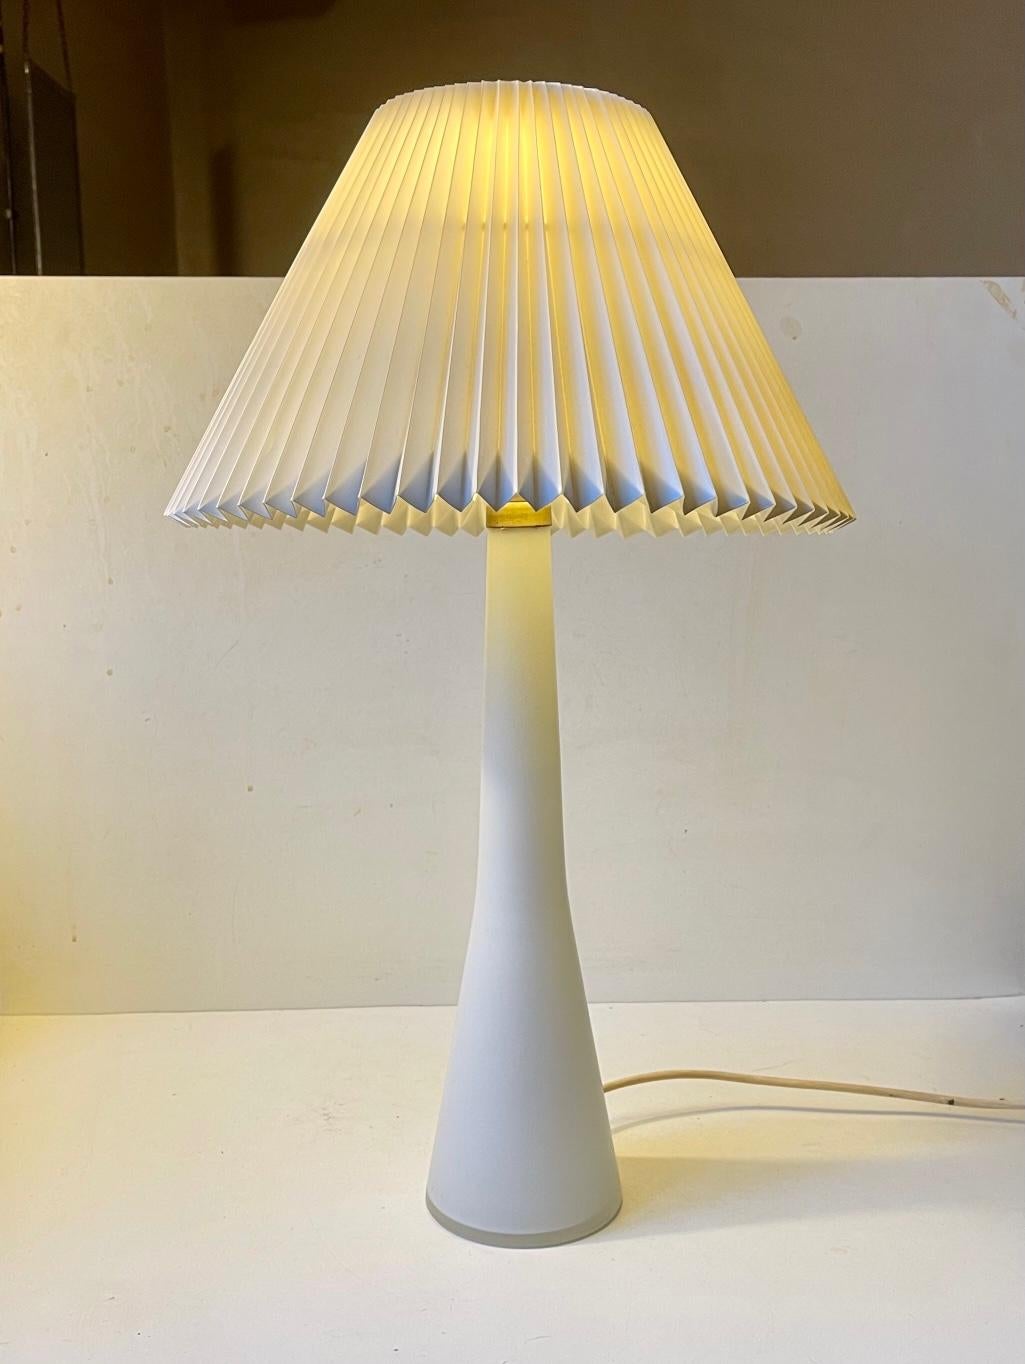 Large and exceptionally rare table light in frosted matté opaline glass. Manufactured by Voss/Holmegaard for Le Klint in Denmark during the 1950s or early 1960s. The fluted vintage Le Klint Shade by Tage Klint is made from folded paper and is